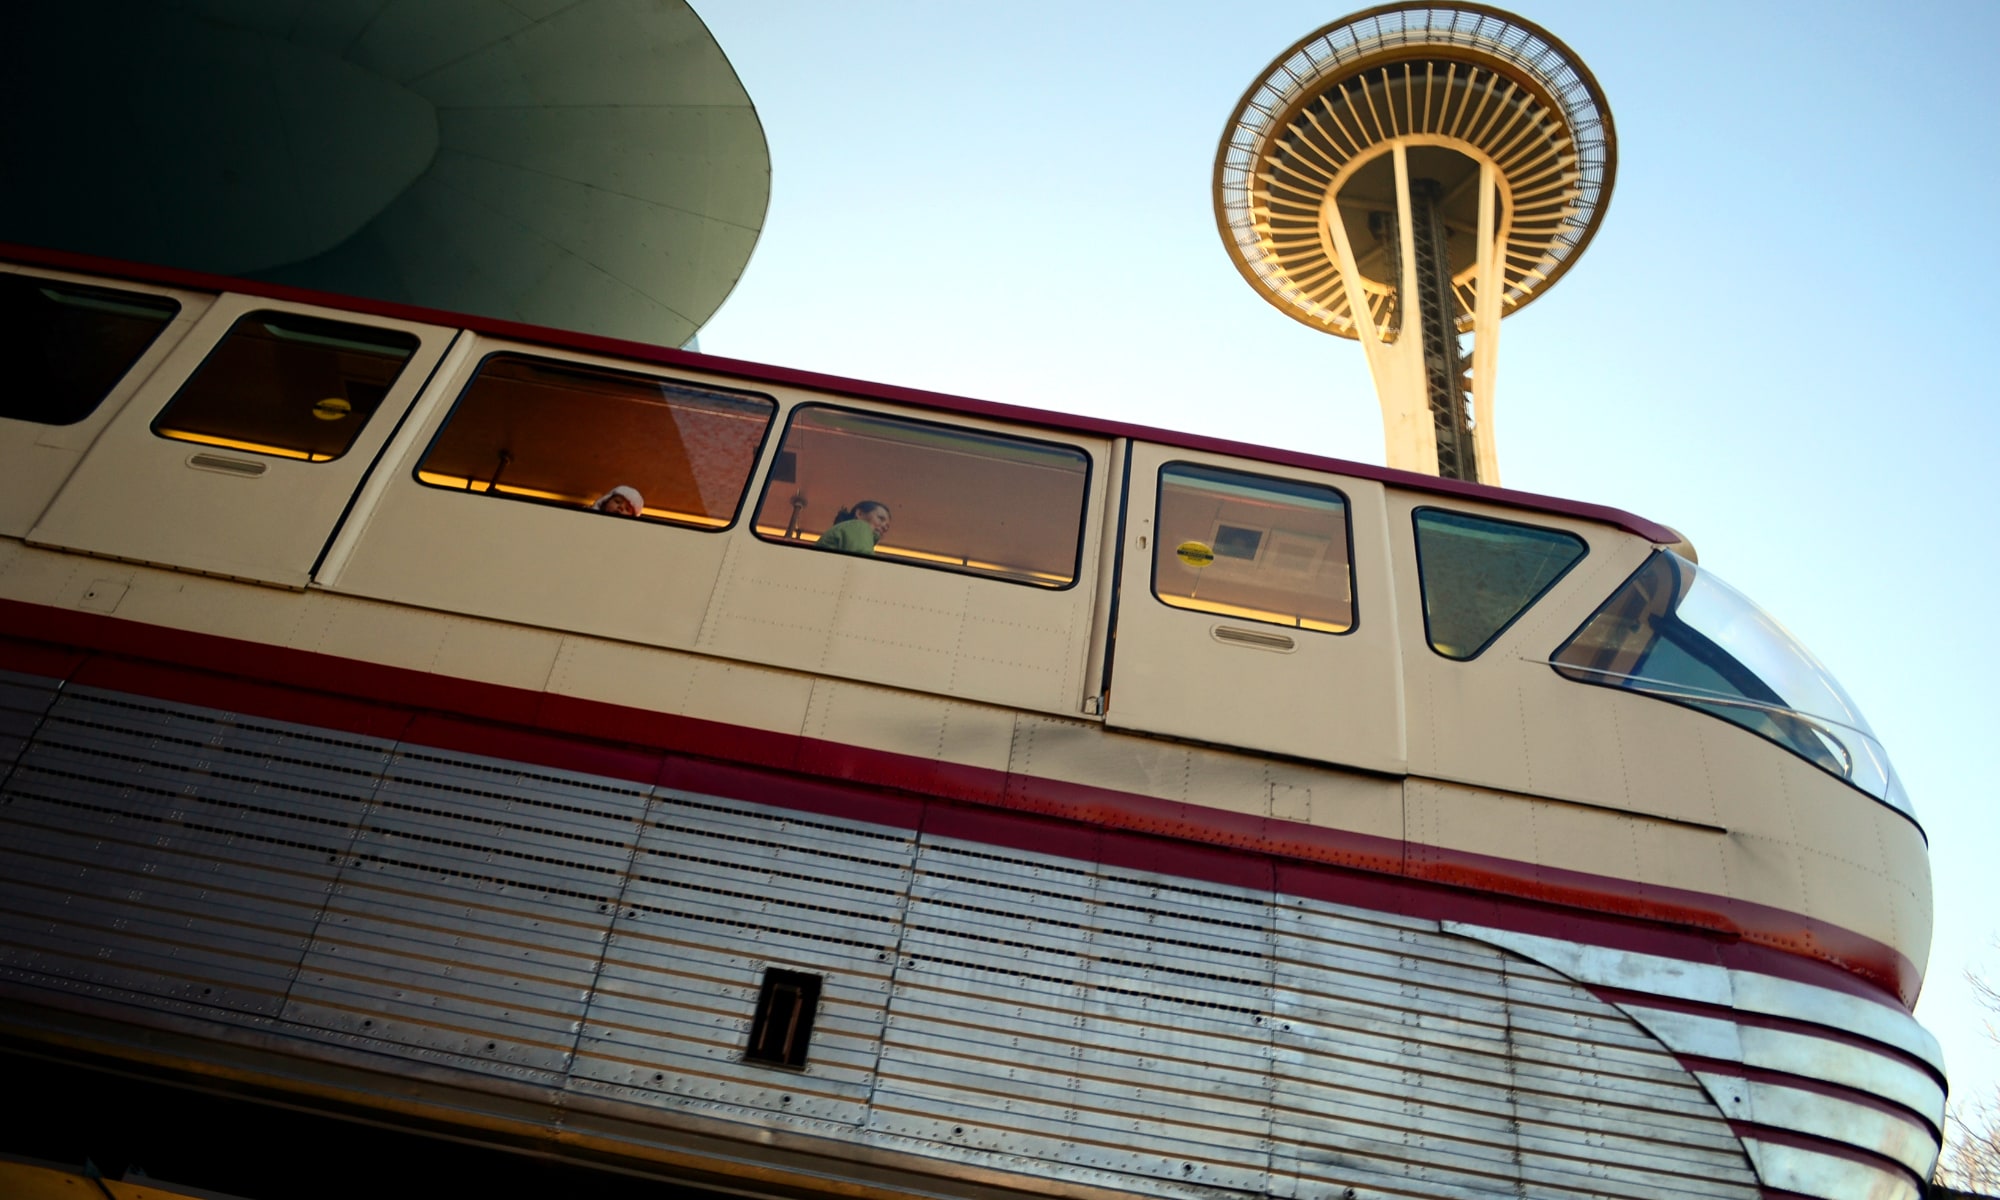 Seattle Monorail Passing Space Needle